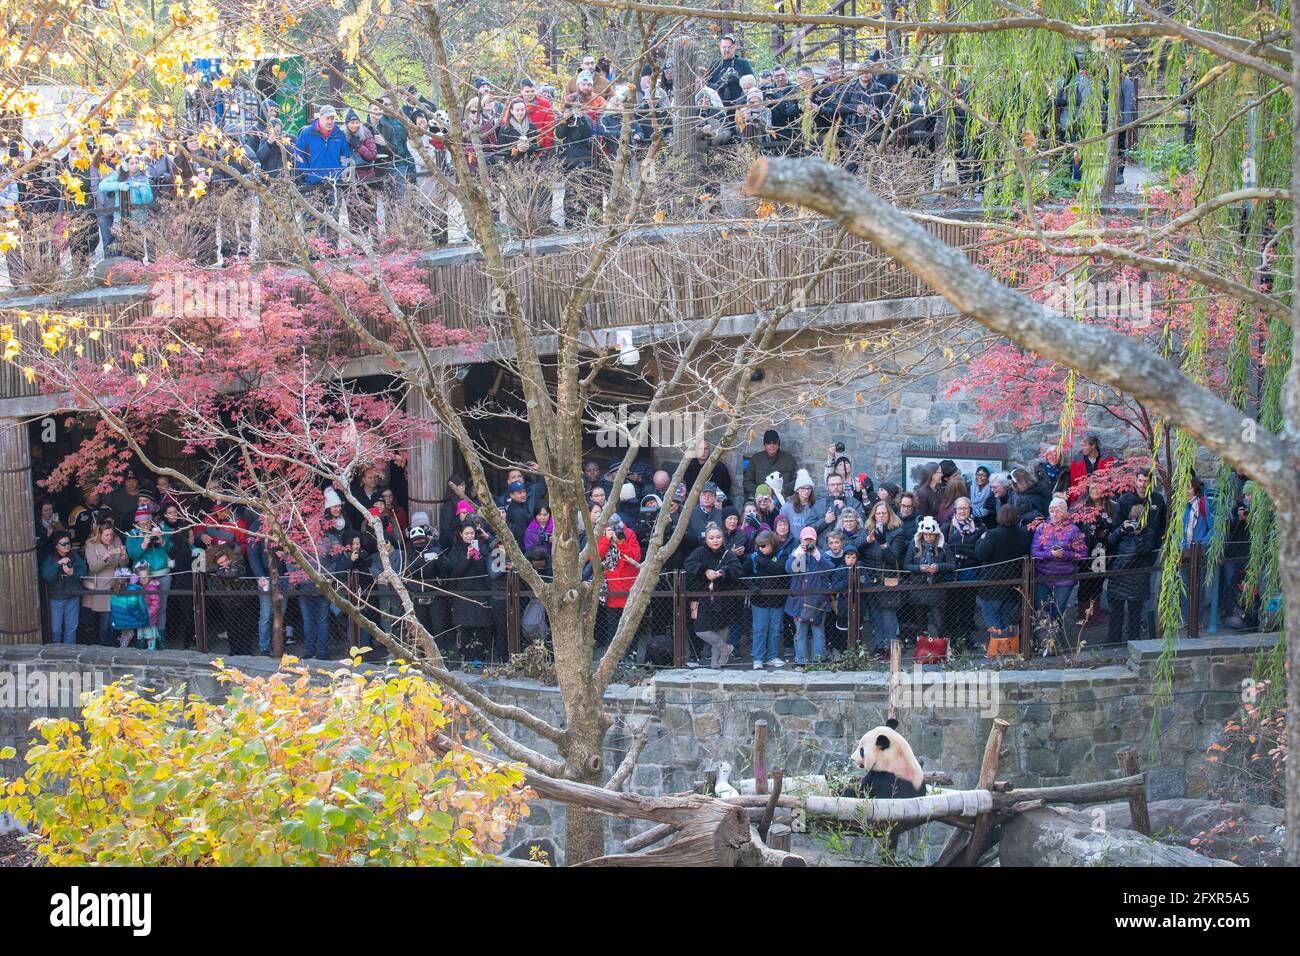 A large crowd watches Bei Bei the Giant Panda on the eve of his departure to China, Smithsonian National Zoo, Washington DC, USA, North America Stock Photo